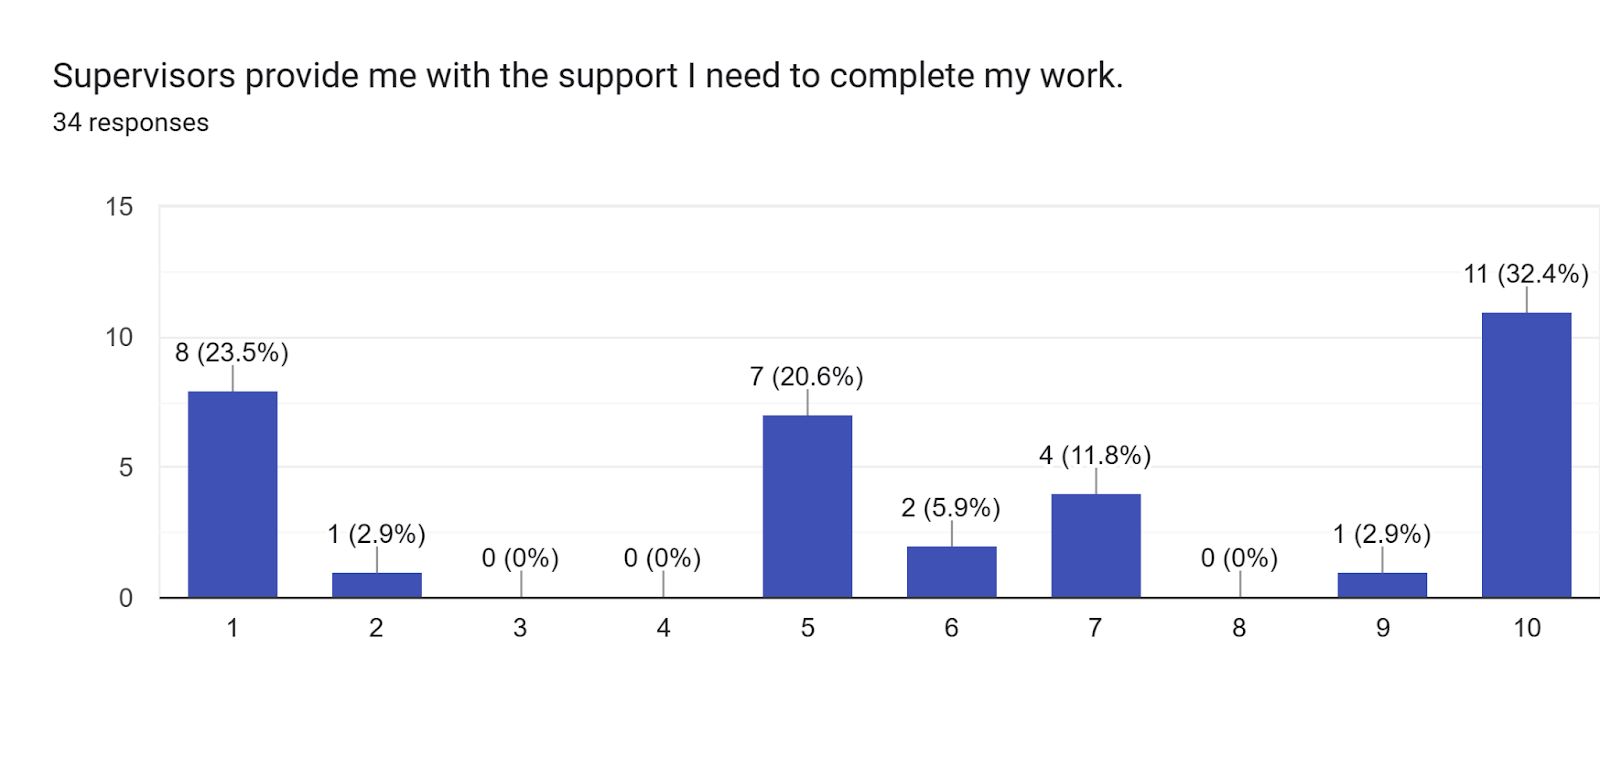 Forms response chart. Question title: Supervisors provide me with the support I need to complete my work.. Number of responses: 34 responses.